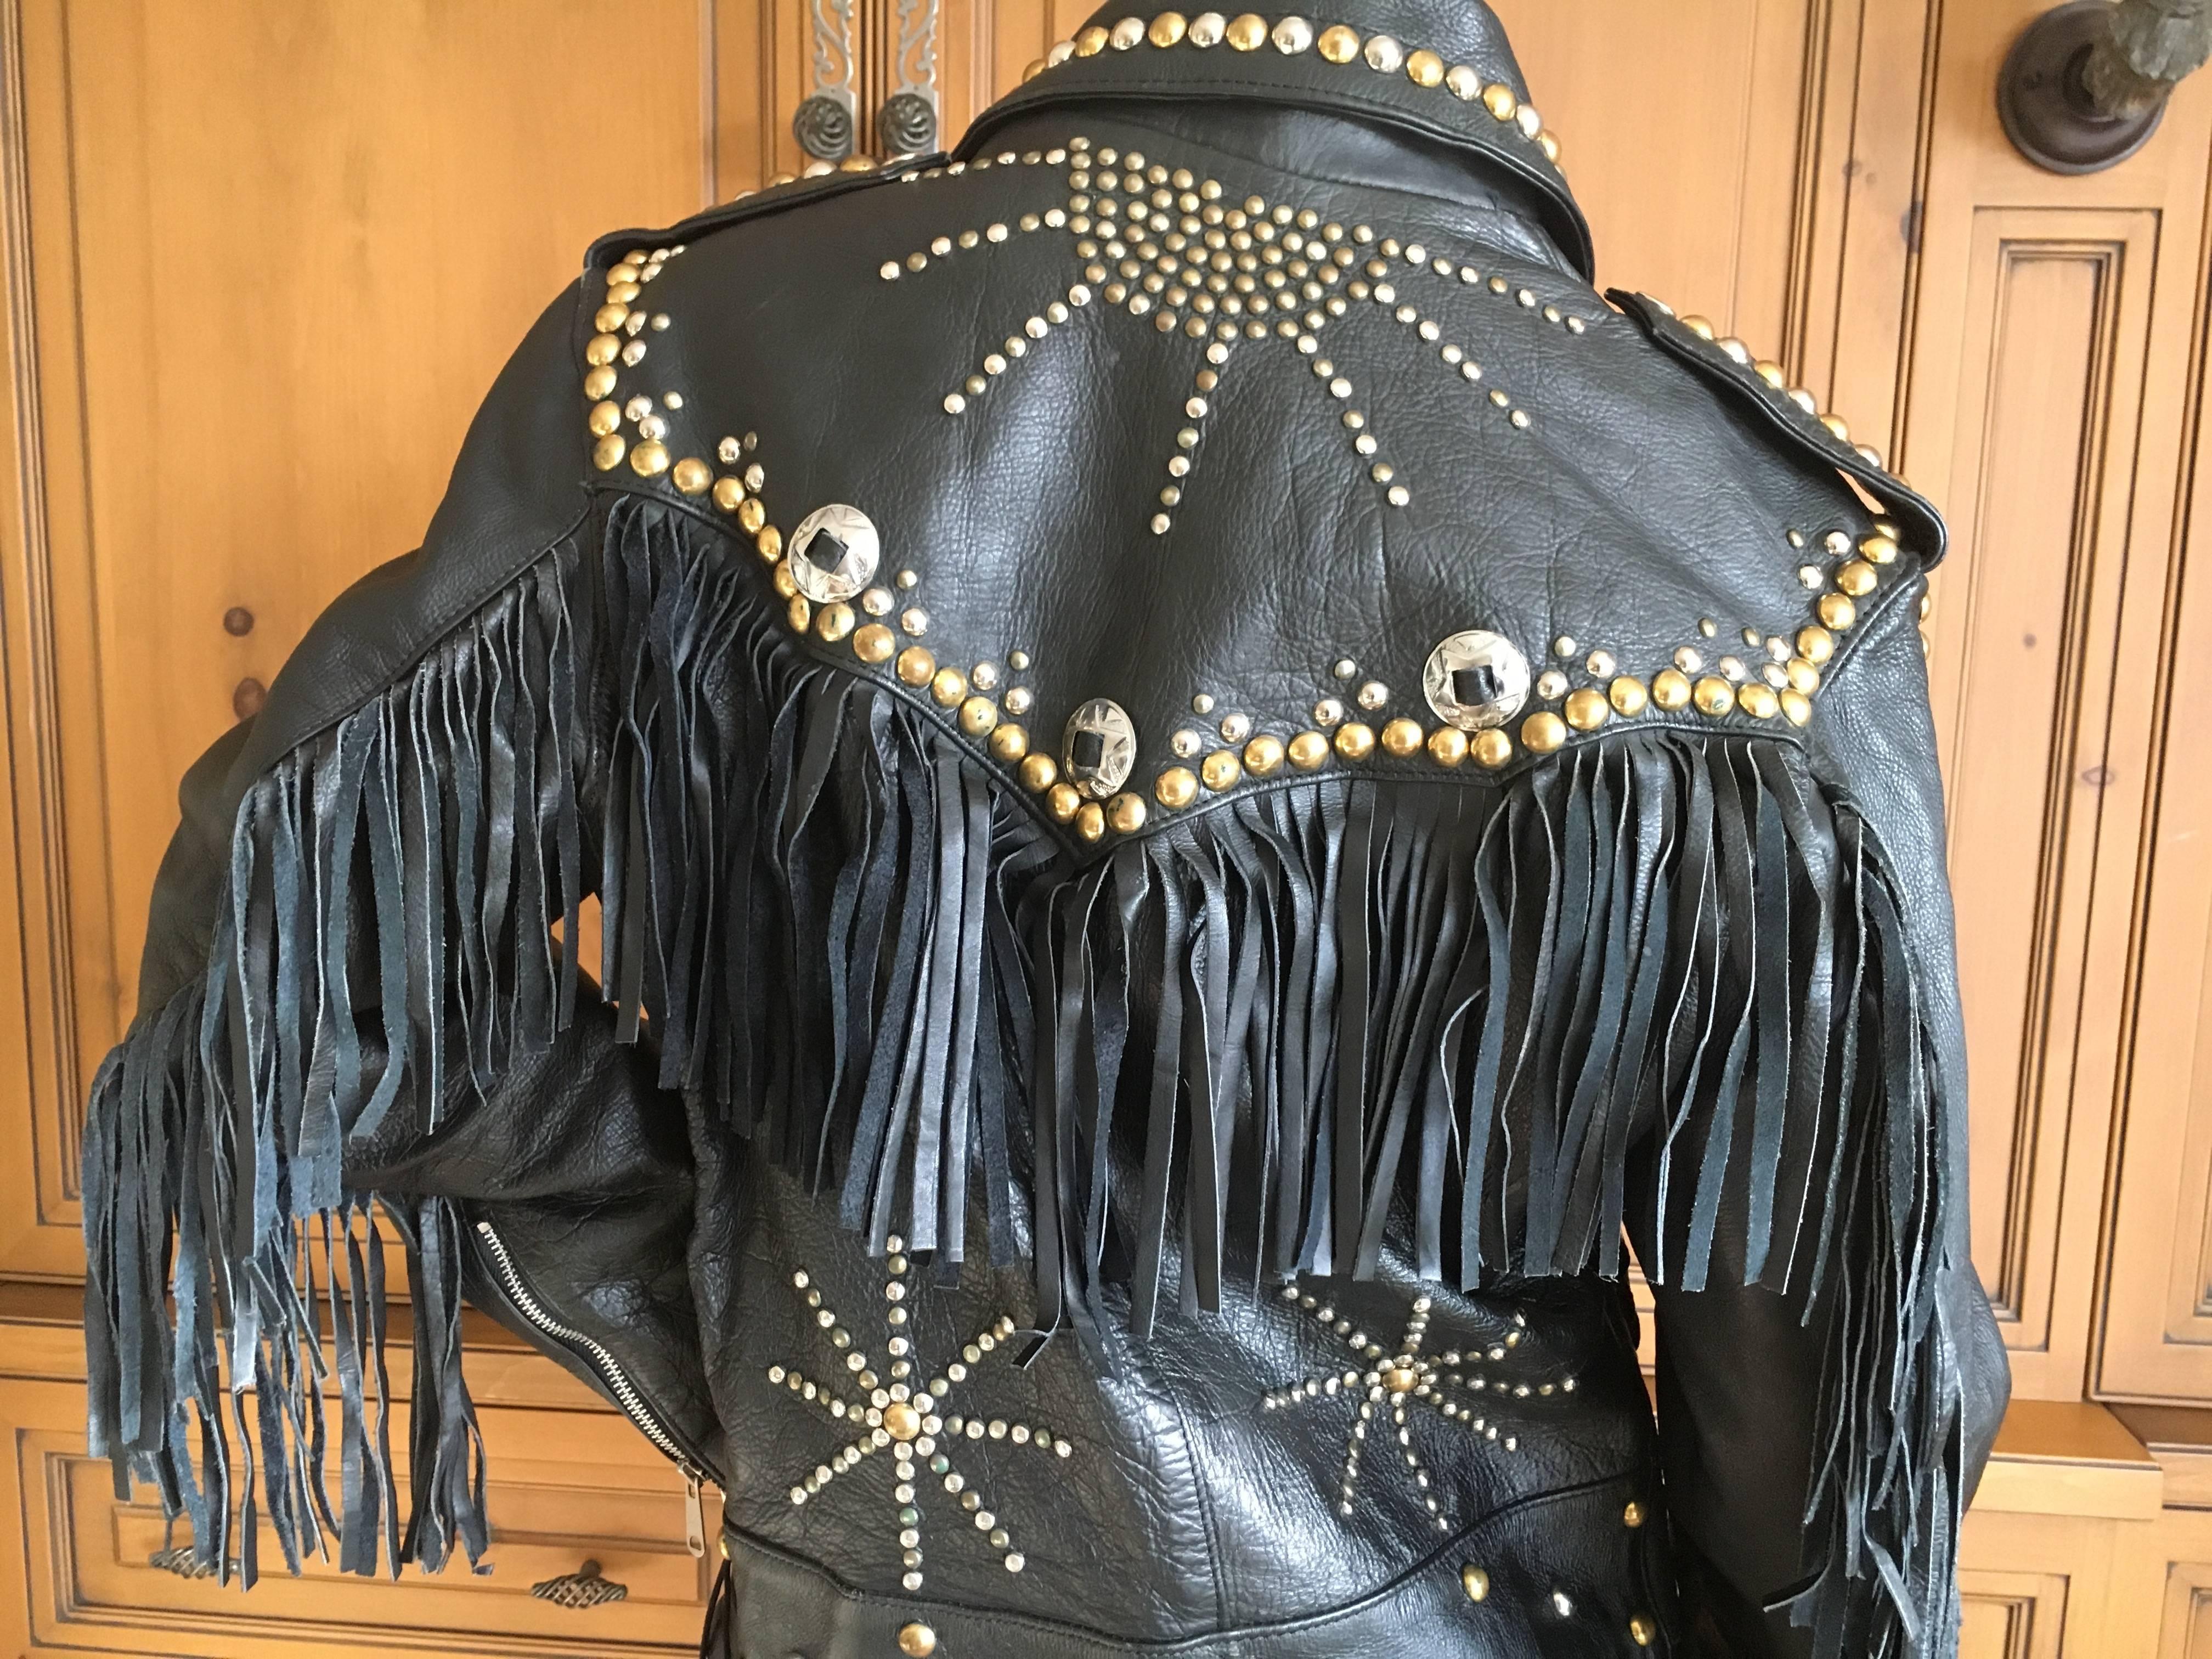 Vintage Men's Leather Motorcycle Jacket with Fringe and Studs 2